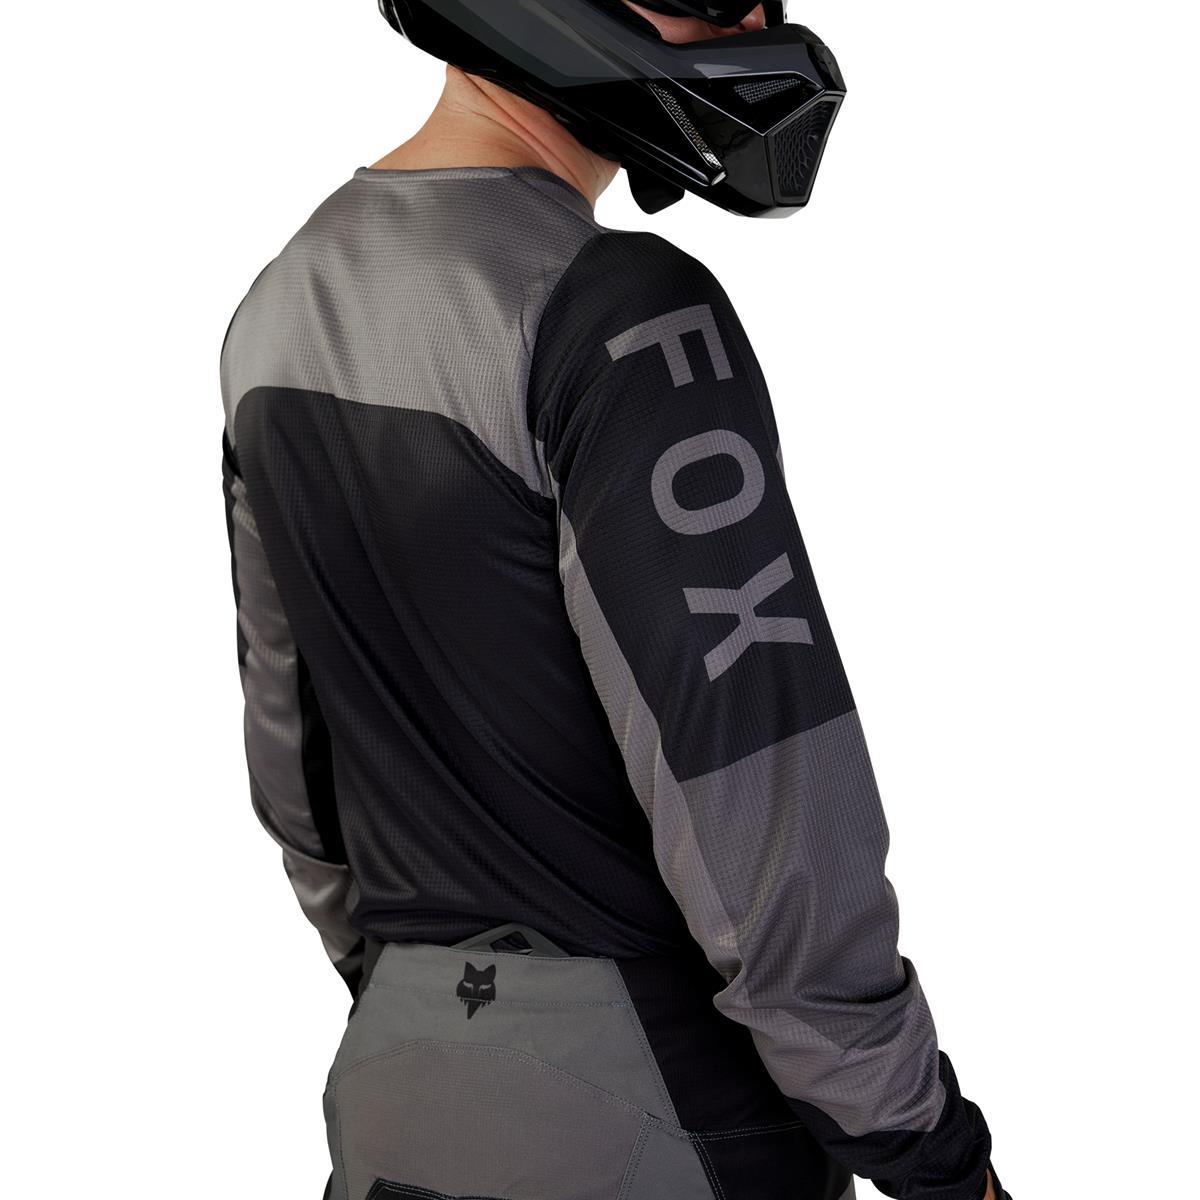 Tested: Fox Racing Legion Offroad Pant and Jersey